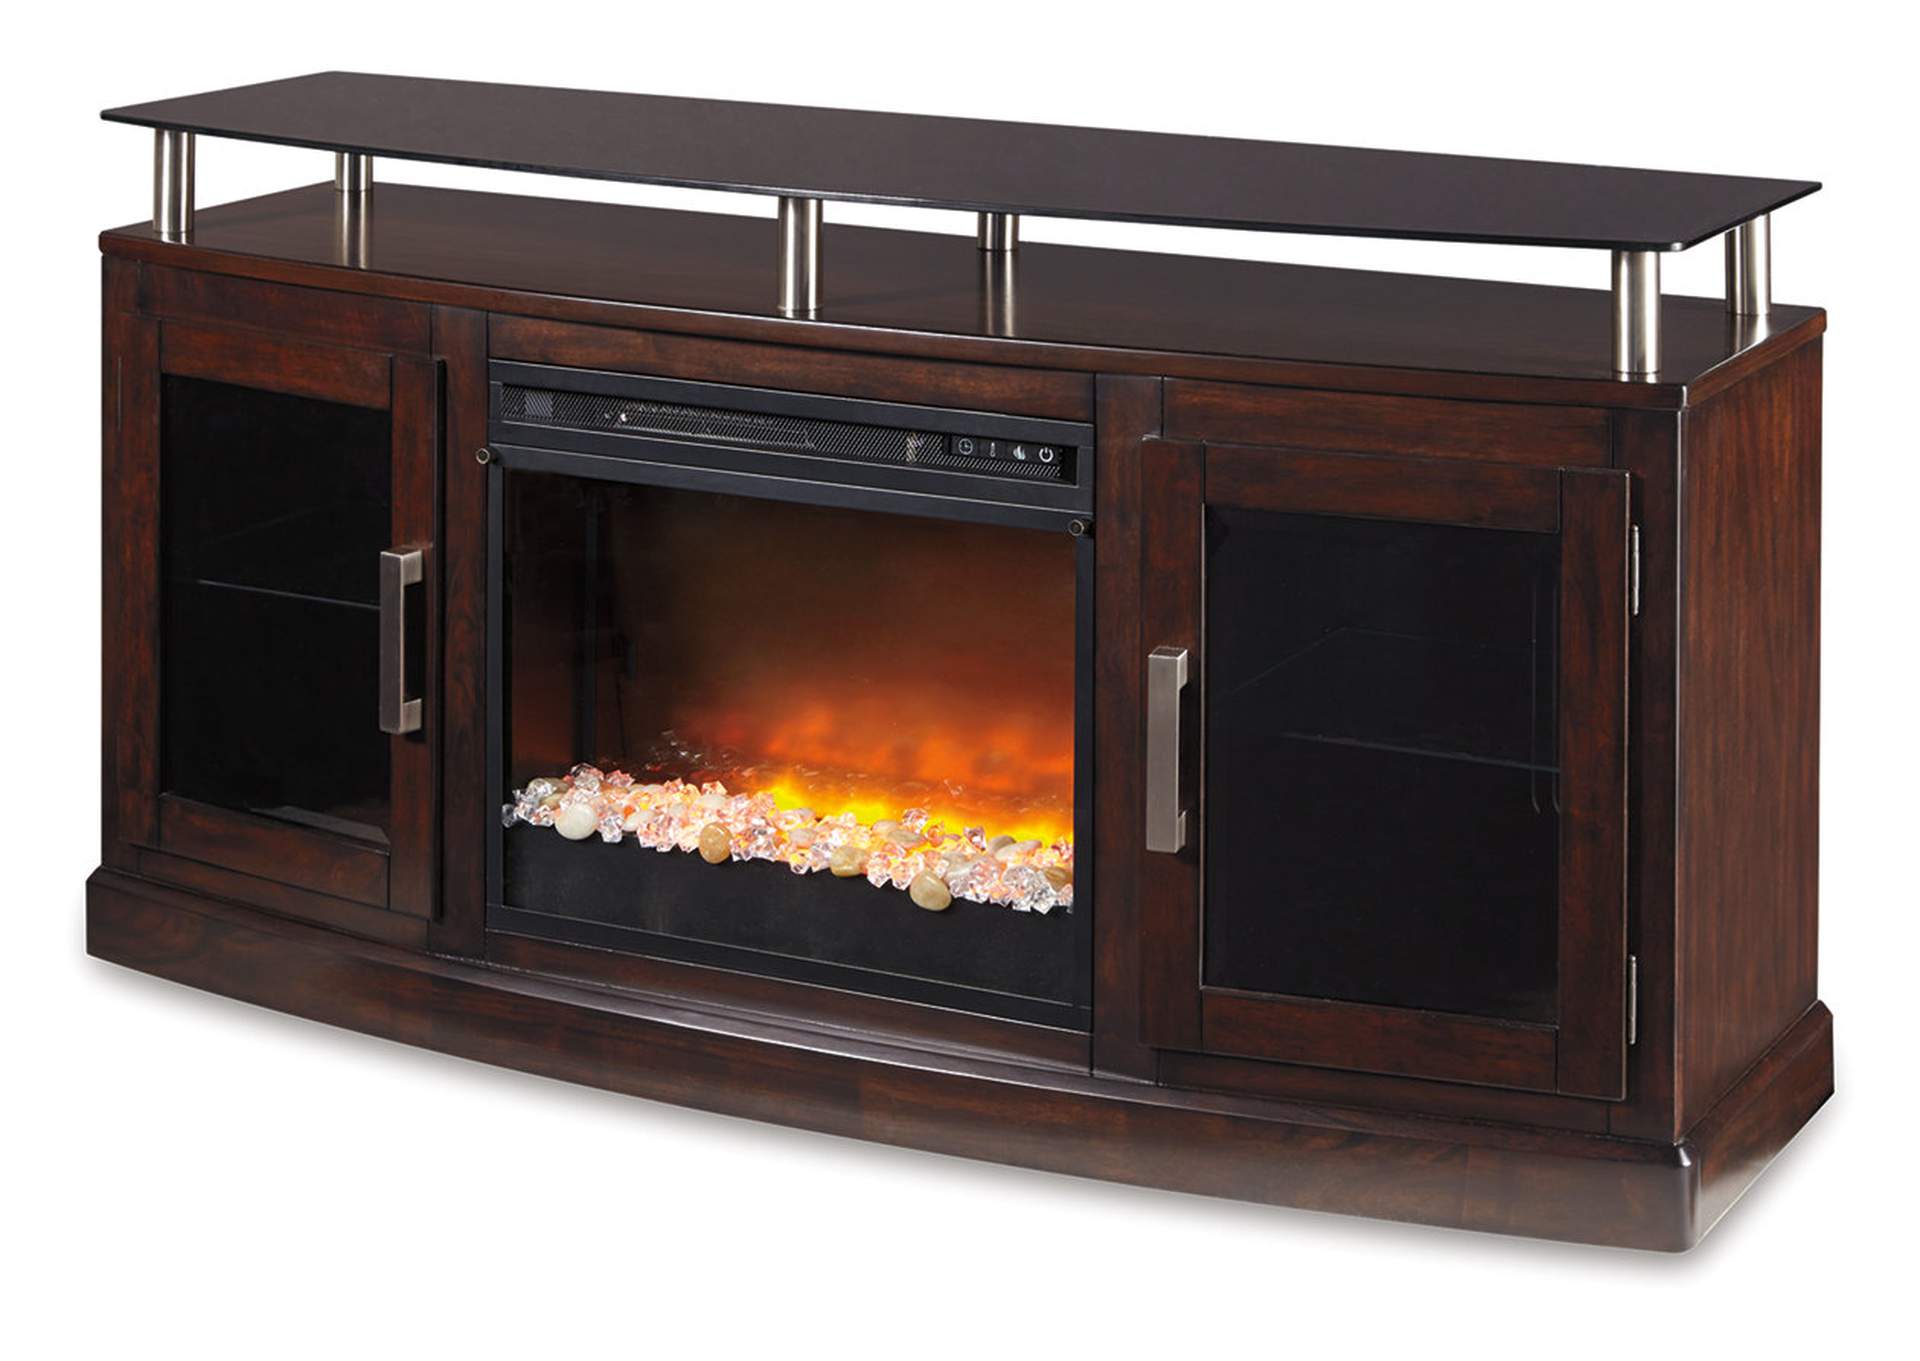 Chanceen 60" TV Stand with Electric Fireplace,Signature Design By Ashley